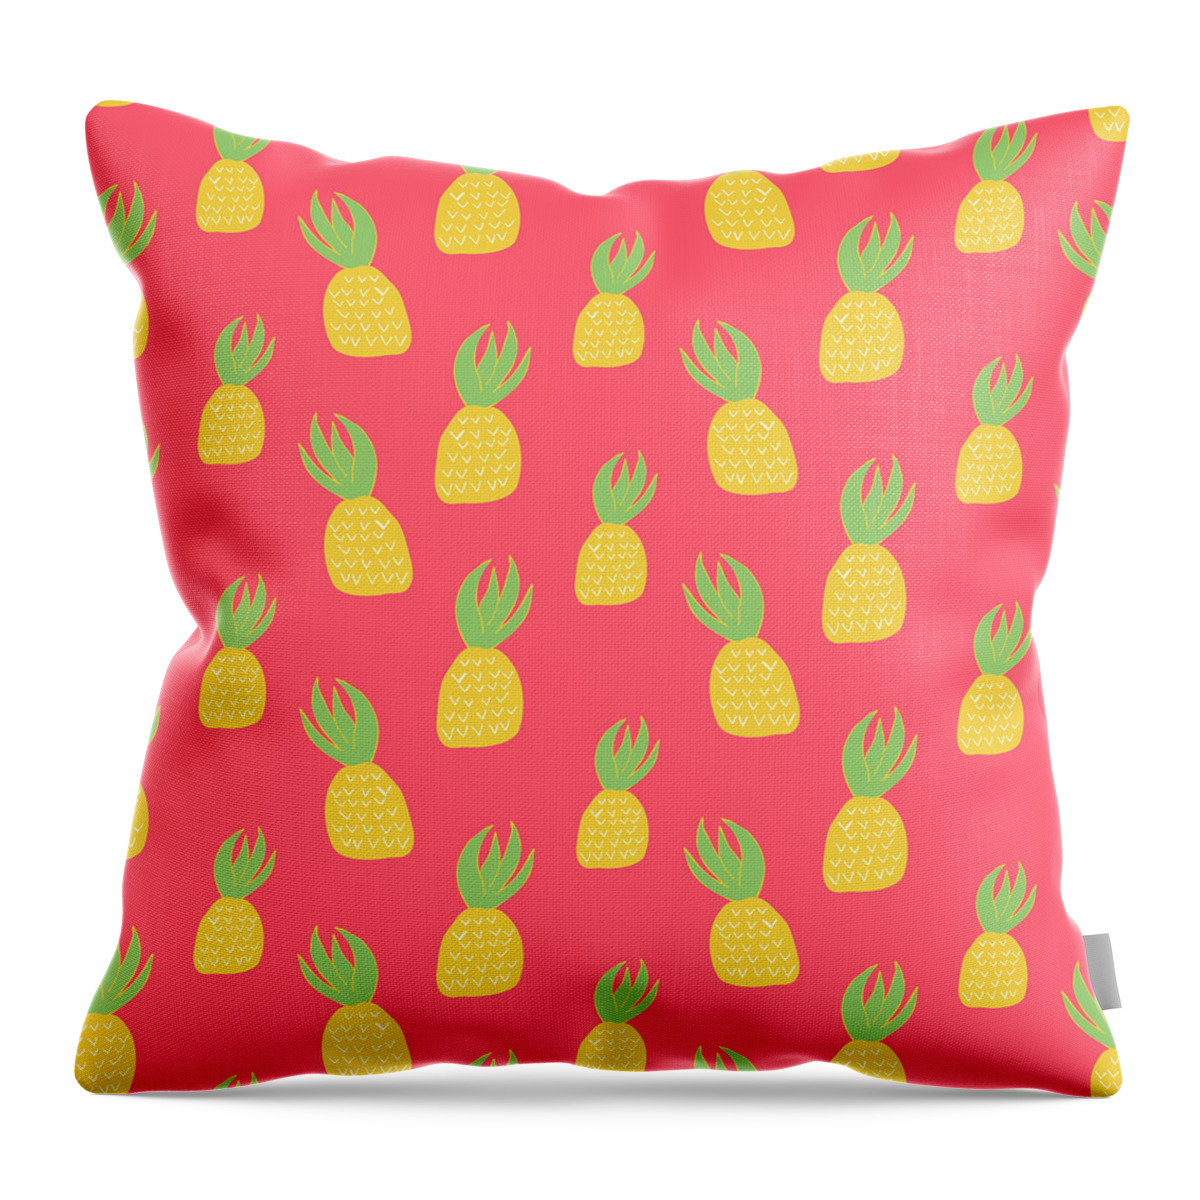 Cute Pineapples Throw Pillow featuring the digital art Cute Pineapples by Allyson Johnson